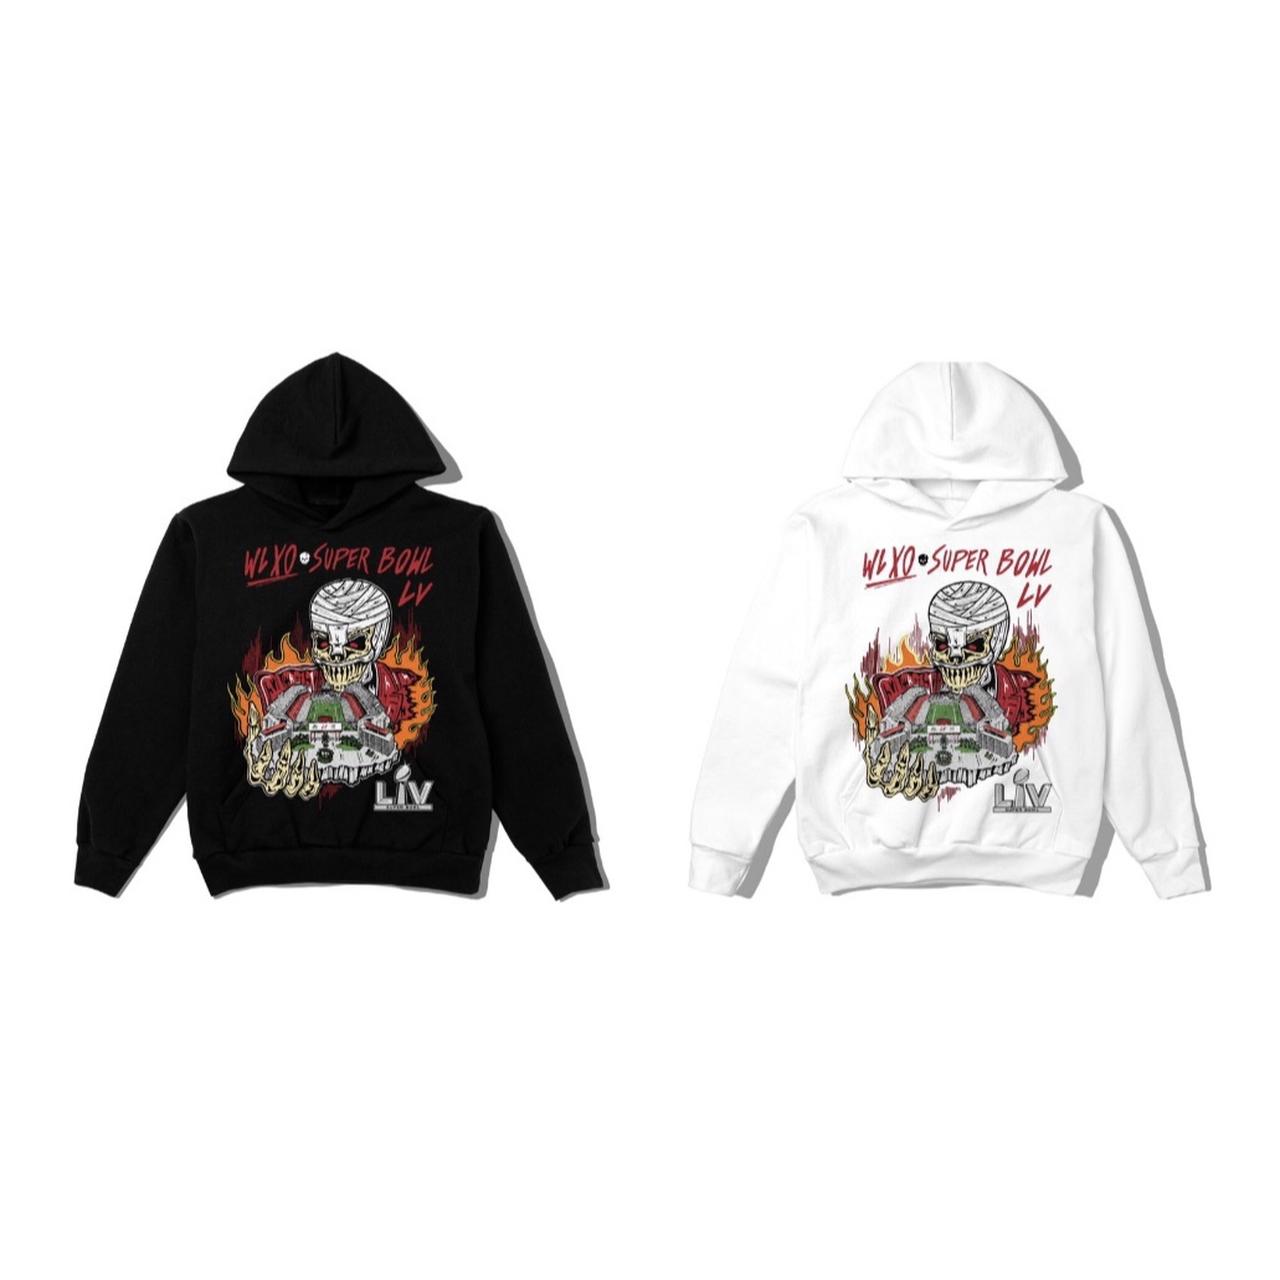 The Weeknd - Super Bowl Halftime Show Hoodies, (2